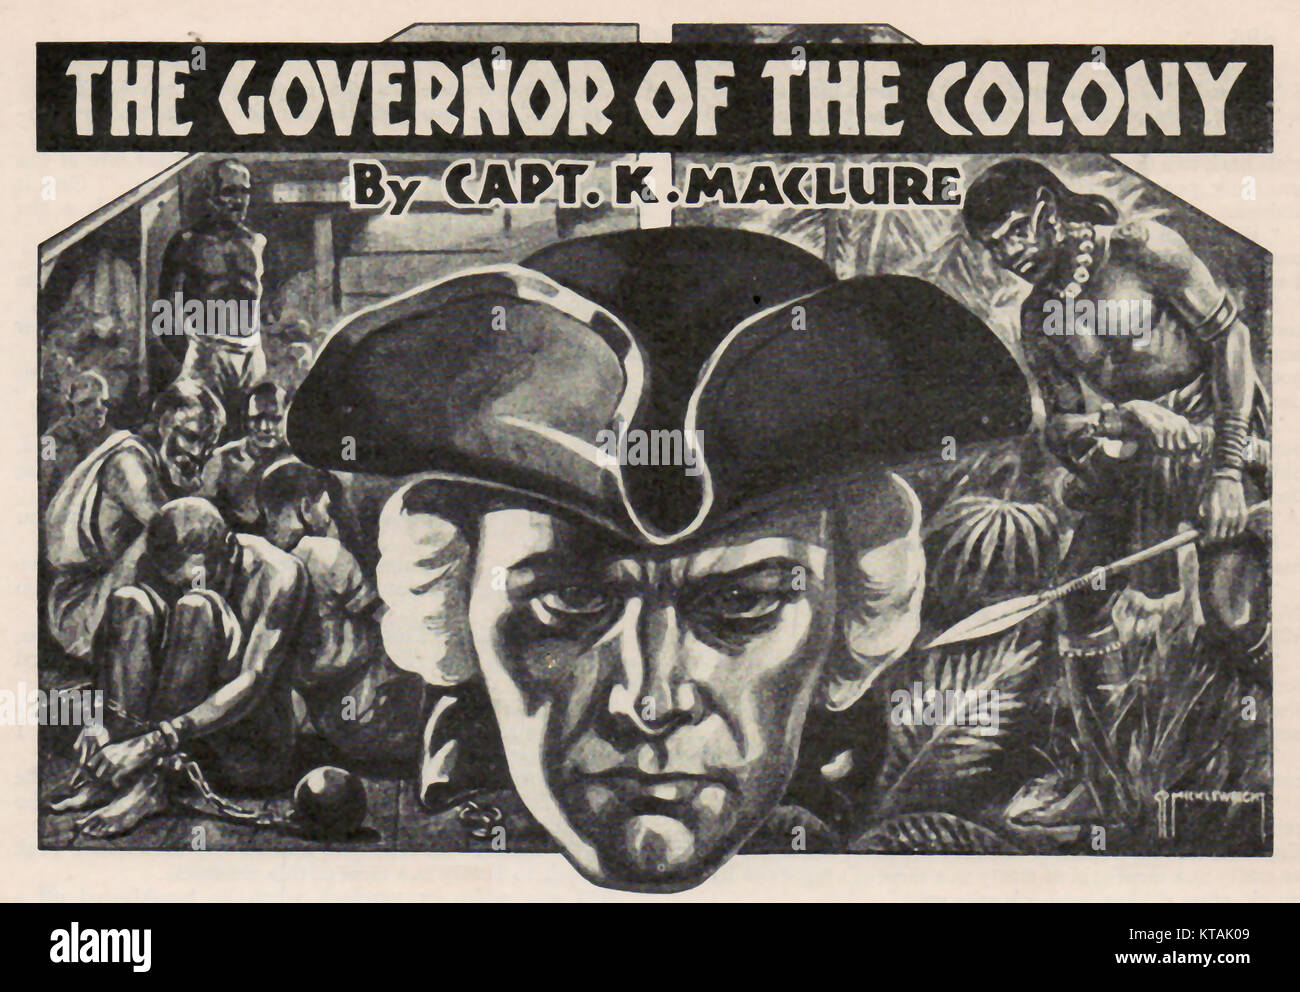 SLAVERY  - An illustration for serialised magazine story 'The Governor of the Colony' by Captain K Maclure 1932 showing an island governor in tricorn hat, African slaves in transit and before capture Stock Photo